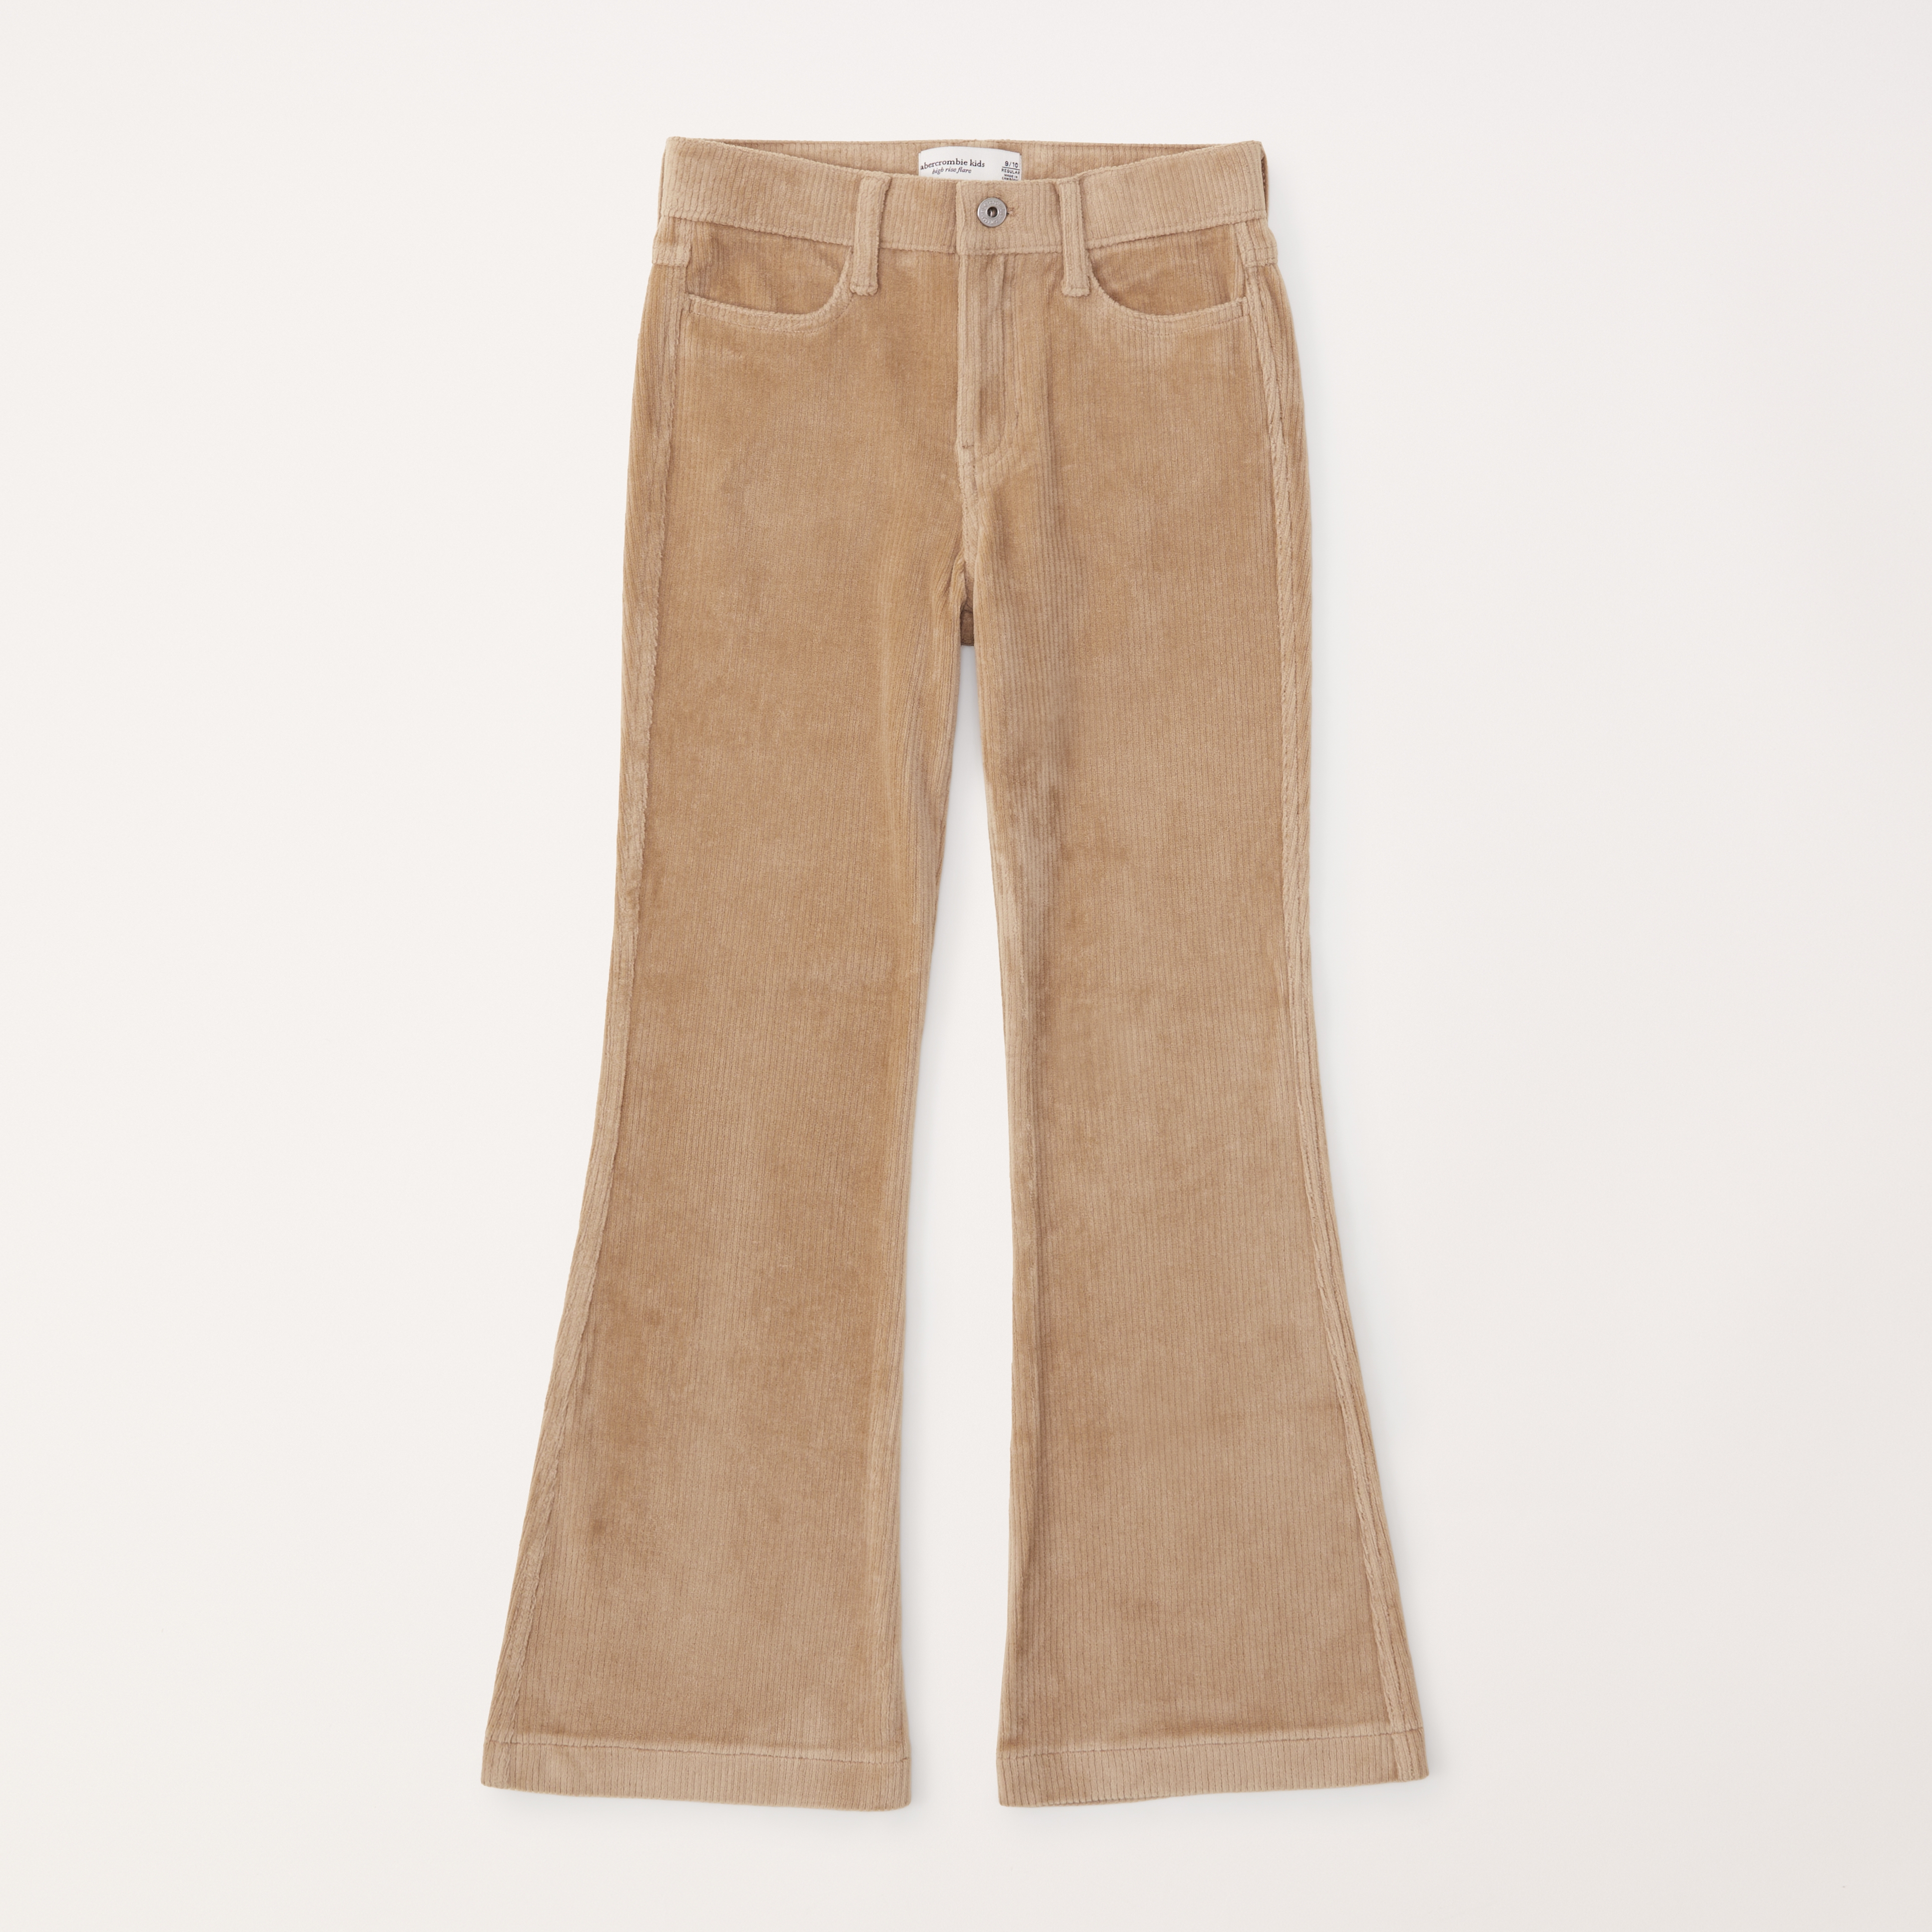 girls high rise corduroy flare pants | girls clearance | Abercrombie.com